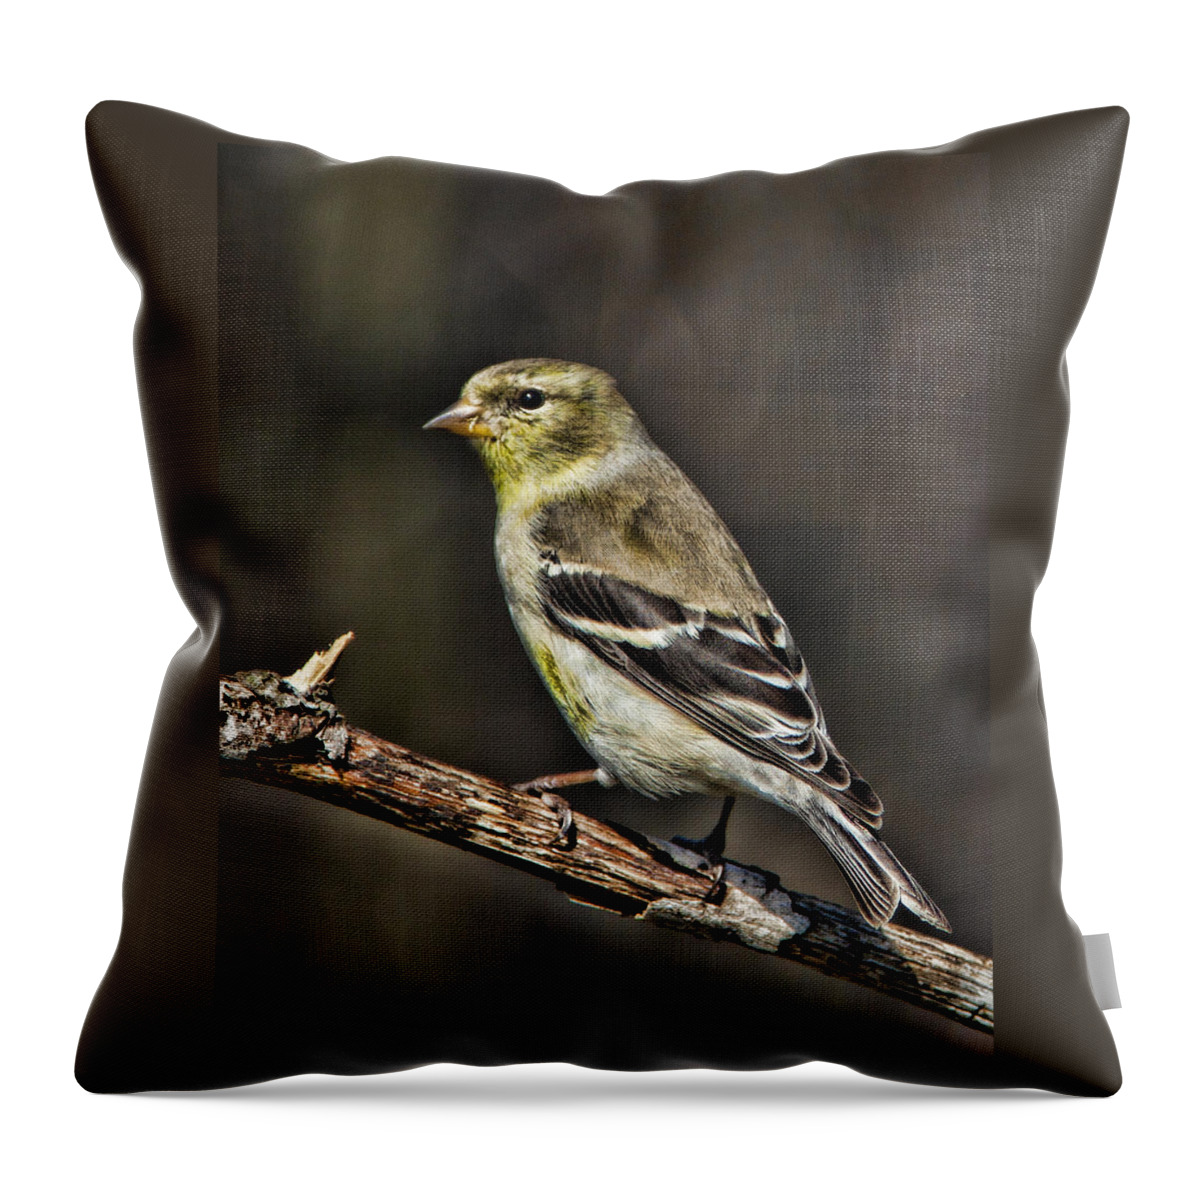 Goldfinch Throw Pillow featuring the photograph Goldfinch by John Crothers